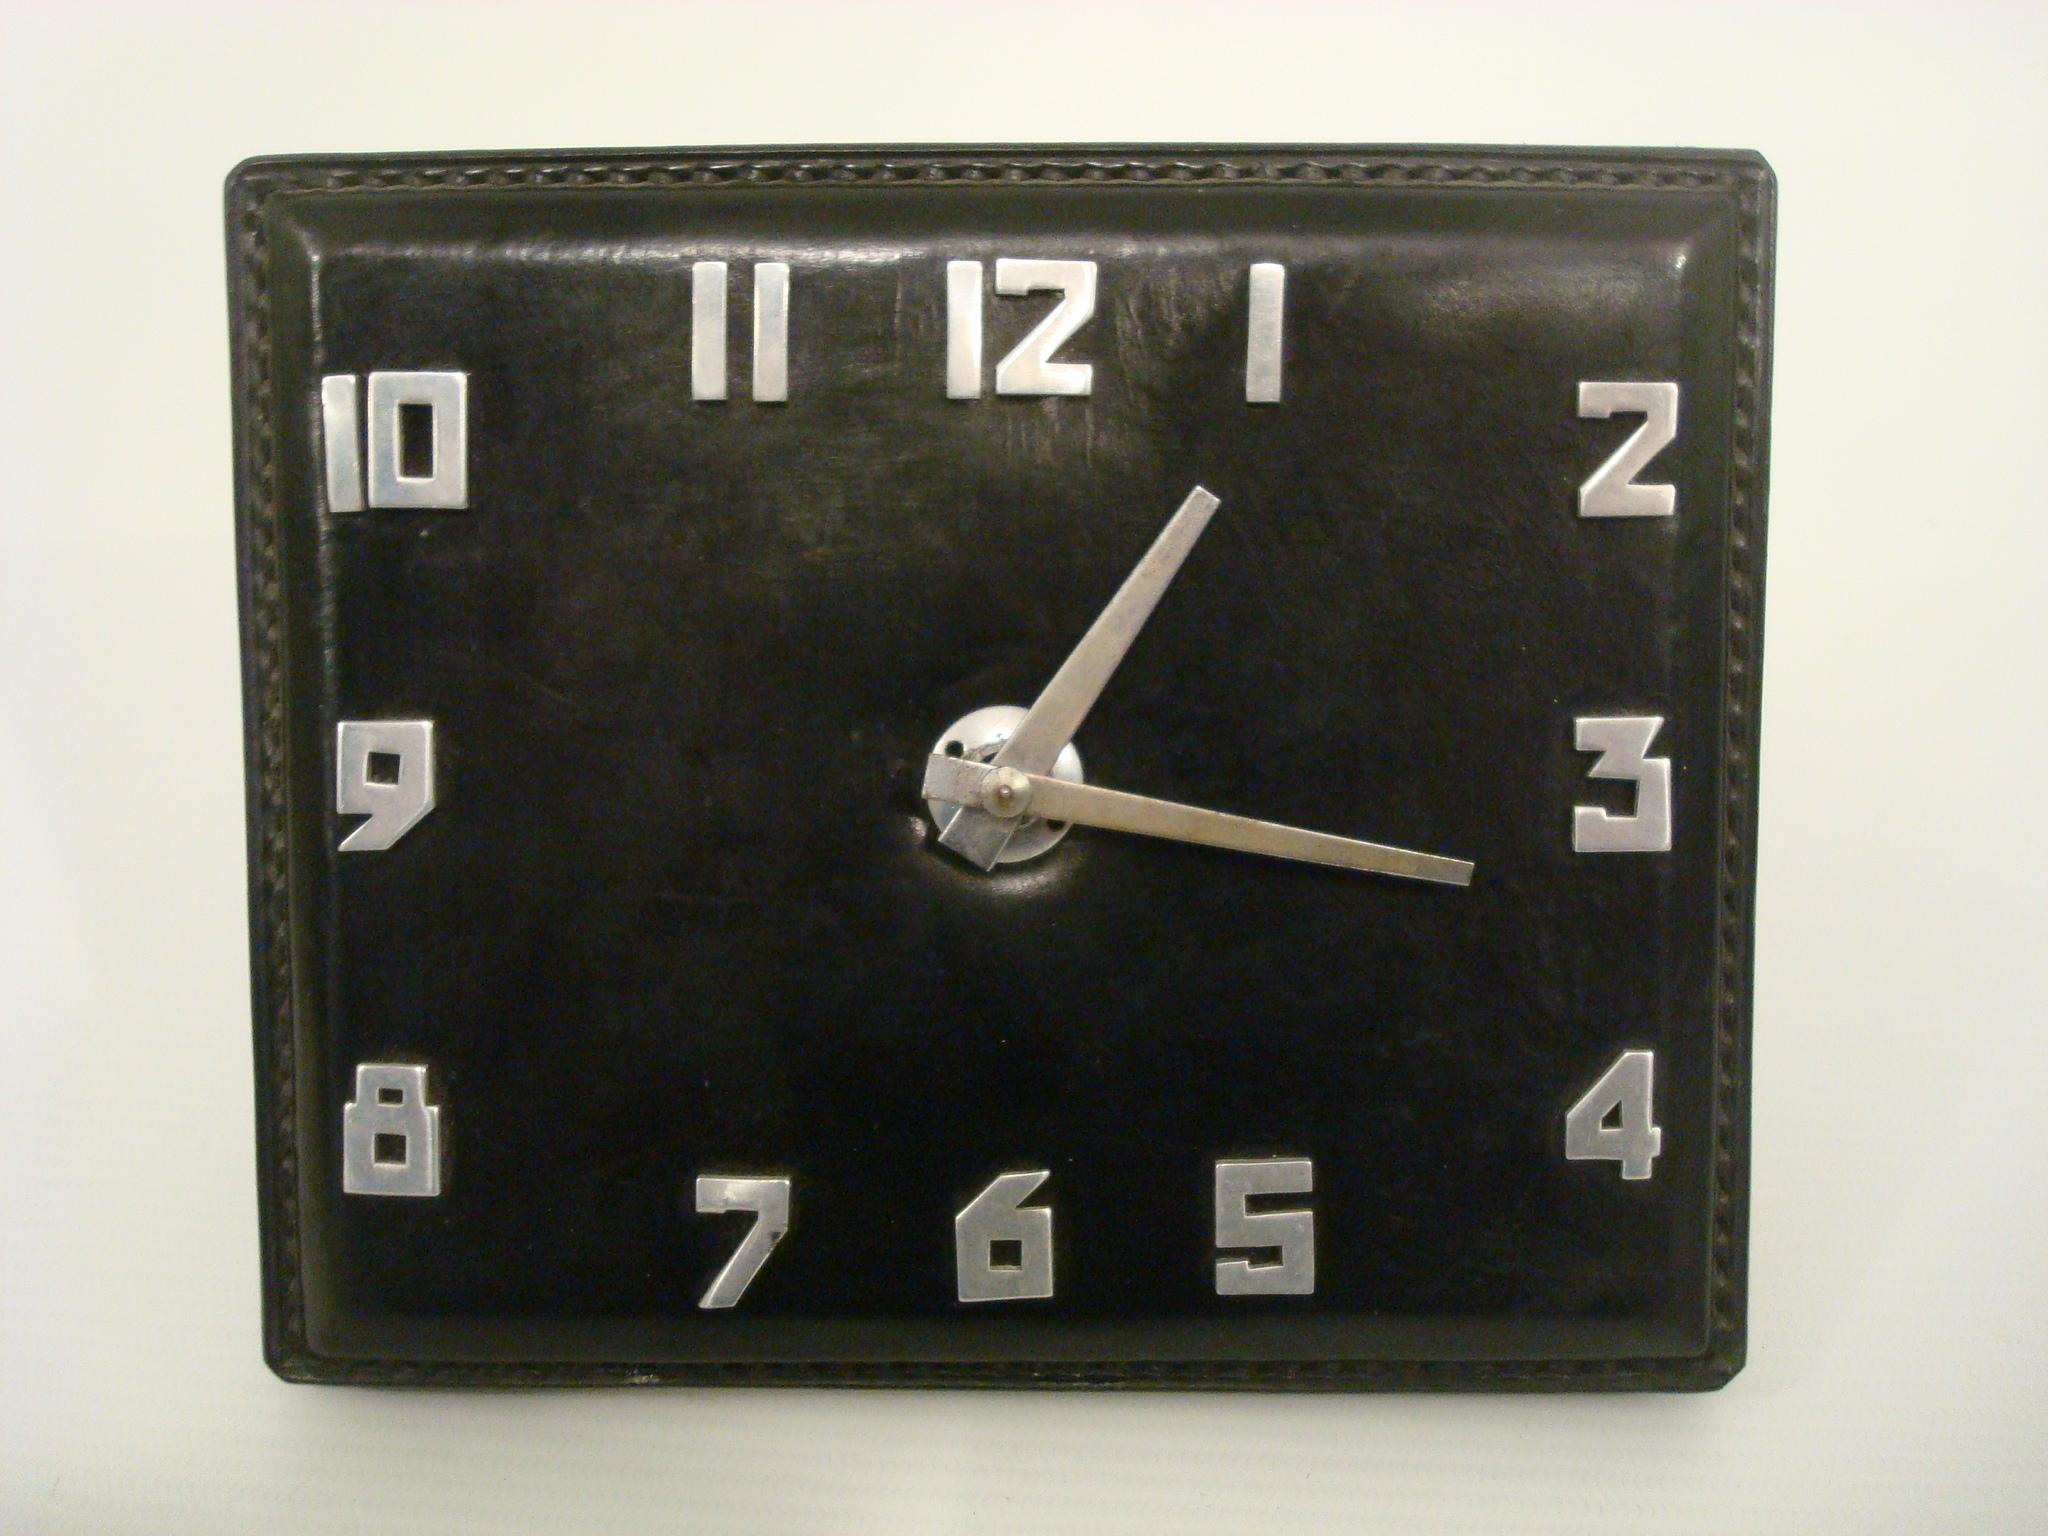 Vintage 1940s Hermes Paris Style Leather Desk / Table Clock
This is a beautiful vintage Hermes style Desk / Table Clock.
Original leather and stitching. Working conditions.